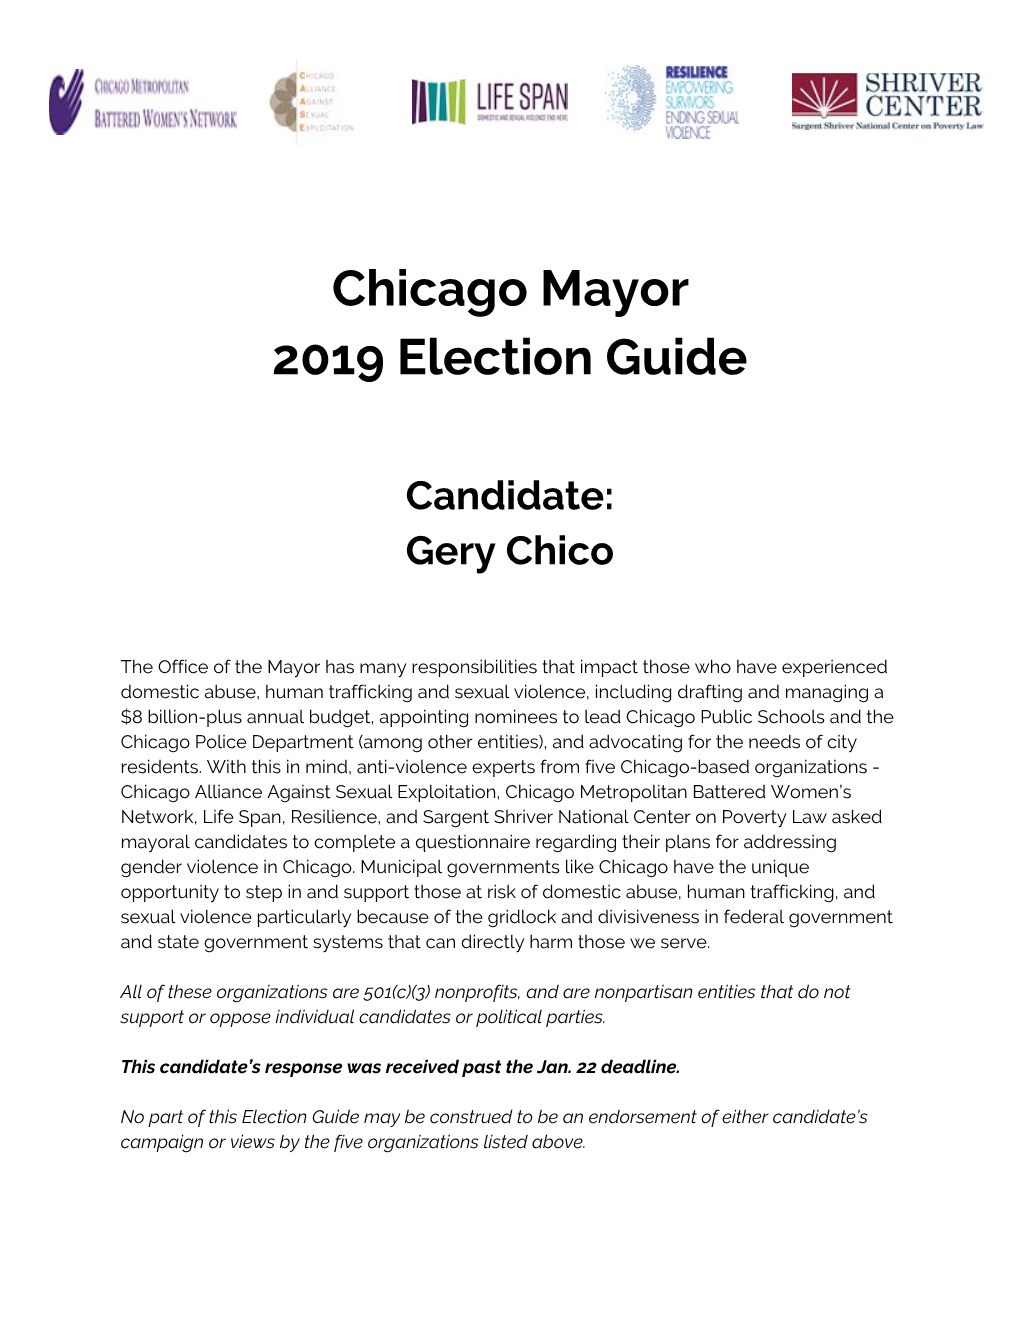 Chicago Mayor 2019 Election Guide